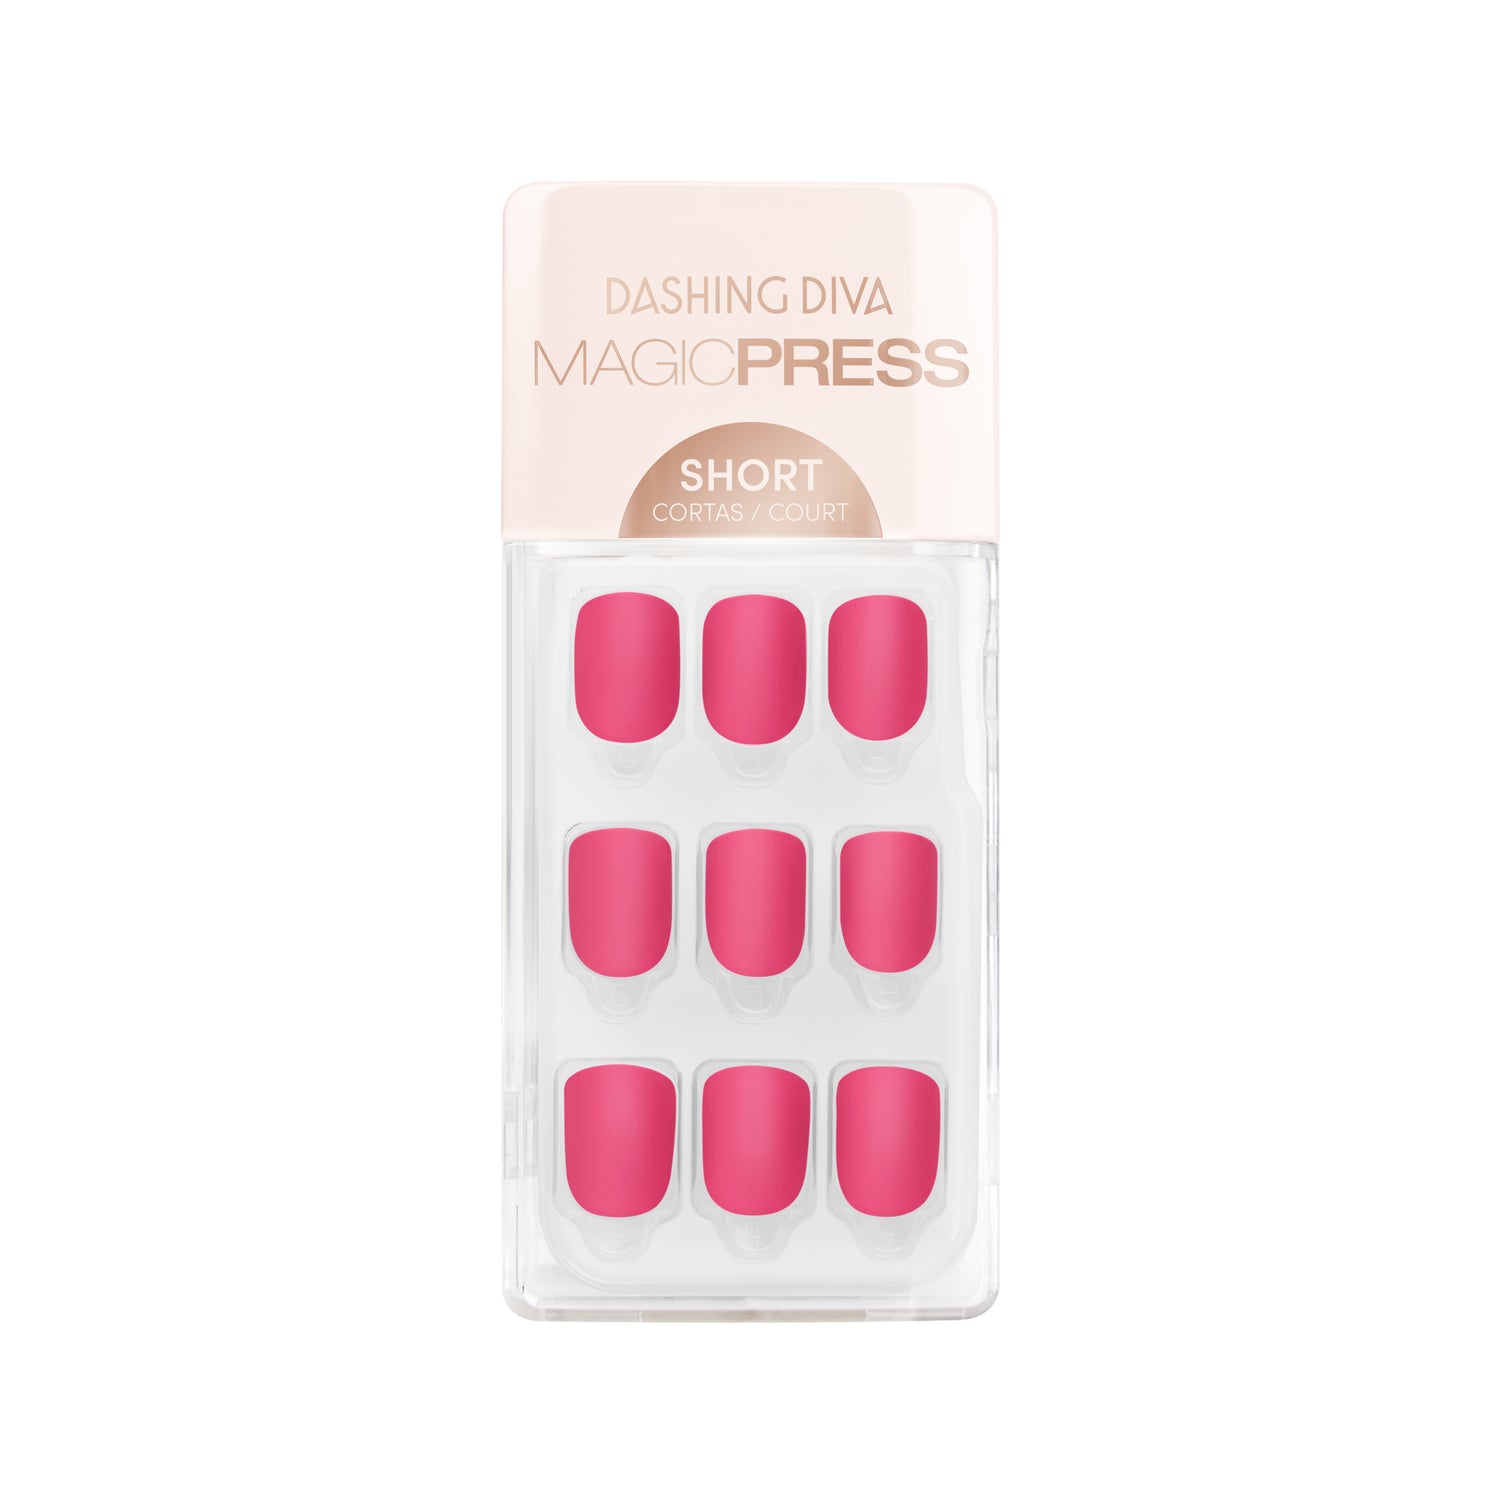 Dashing Diva MAGIC PRESS short, square, bright pink press-on gel nails with a matte finish.